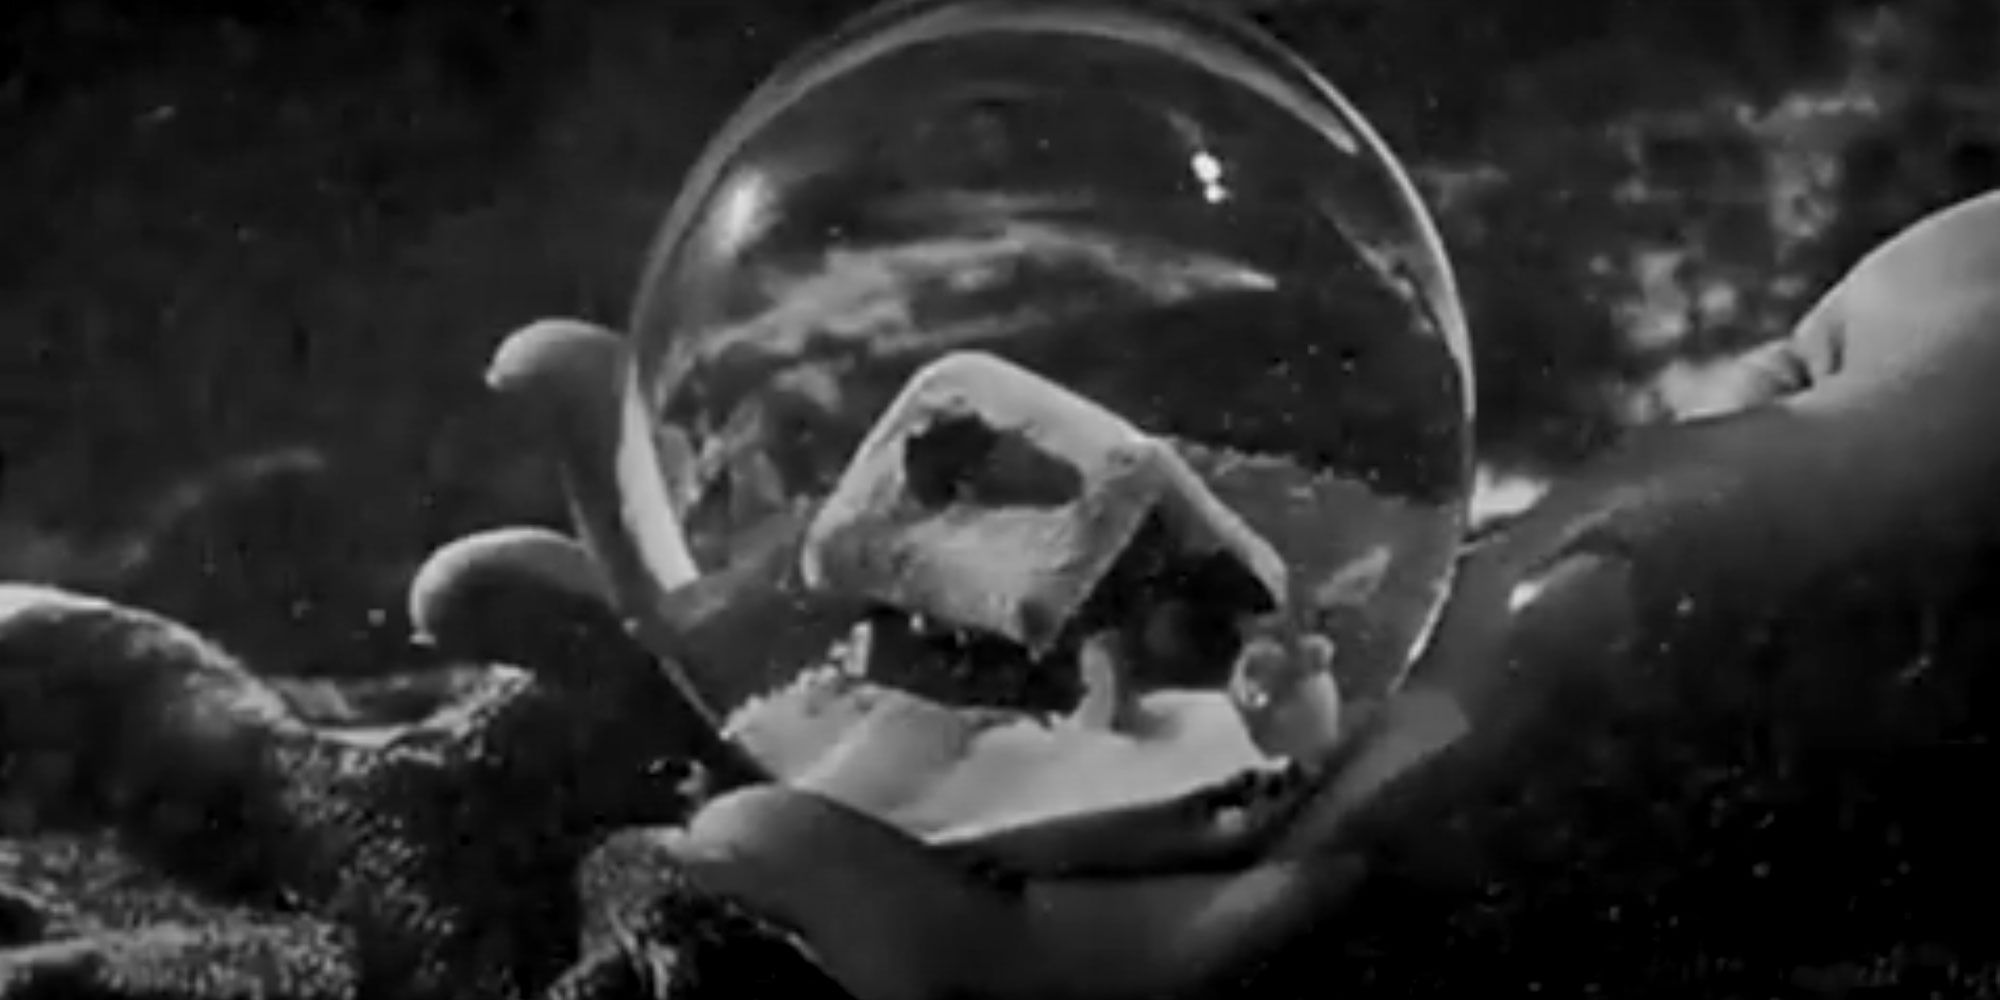 The snow globe from Citizen Kane